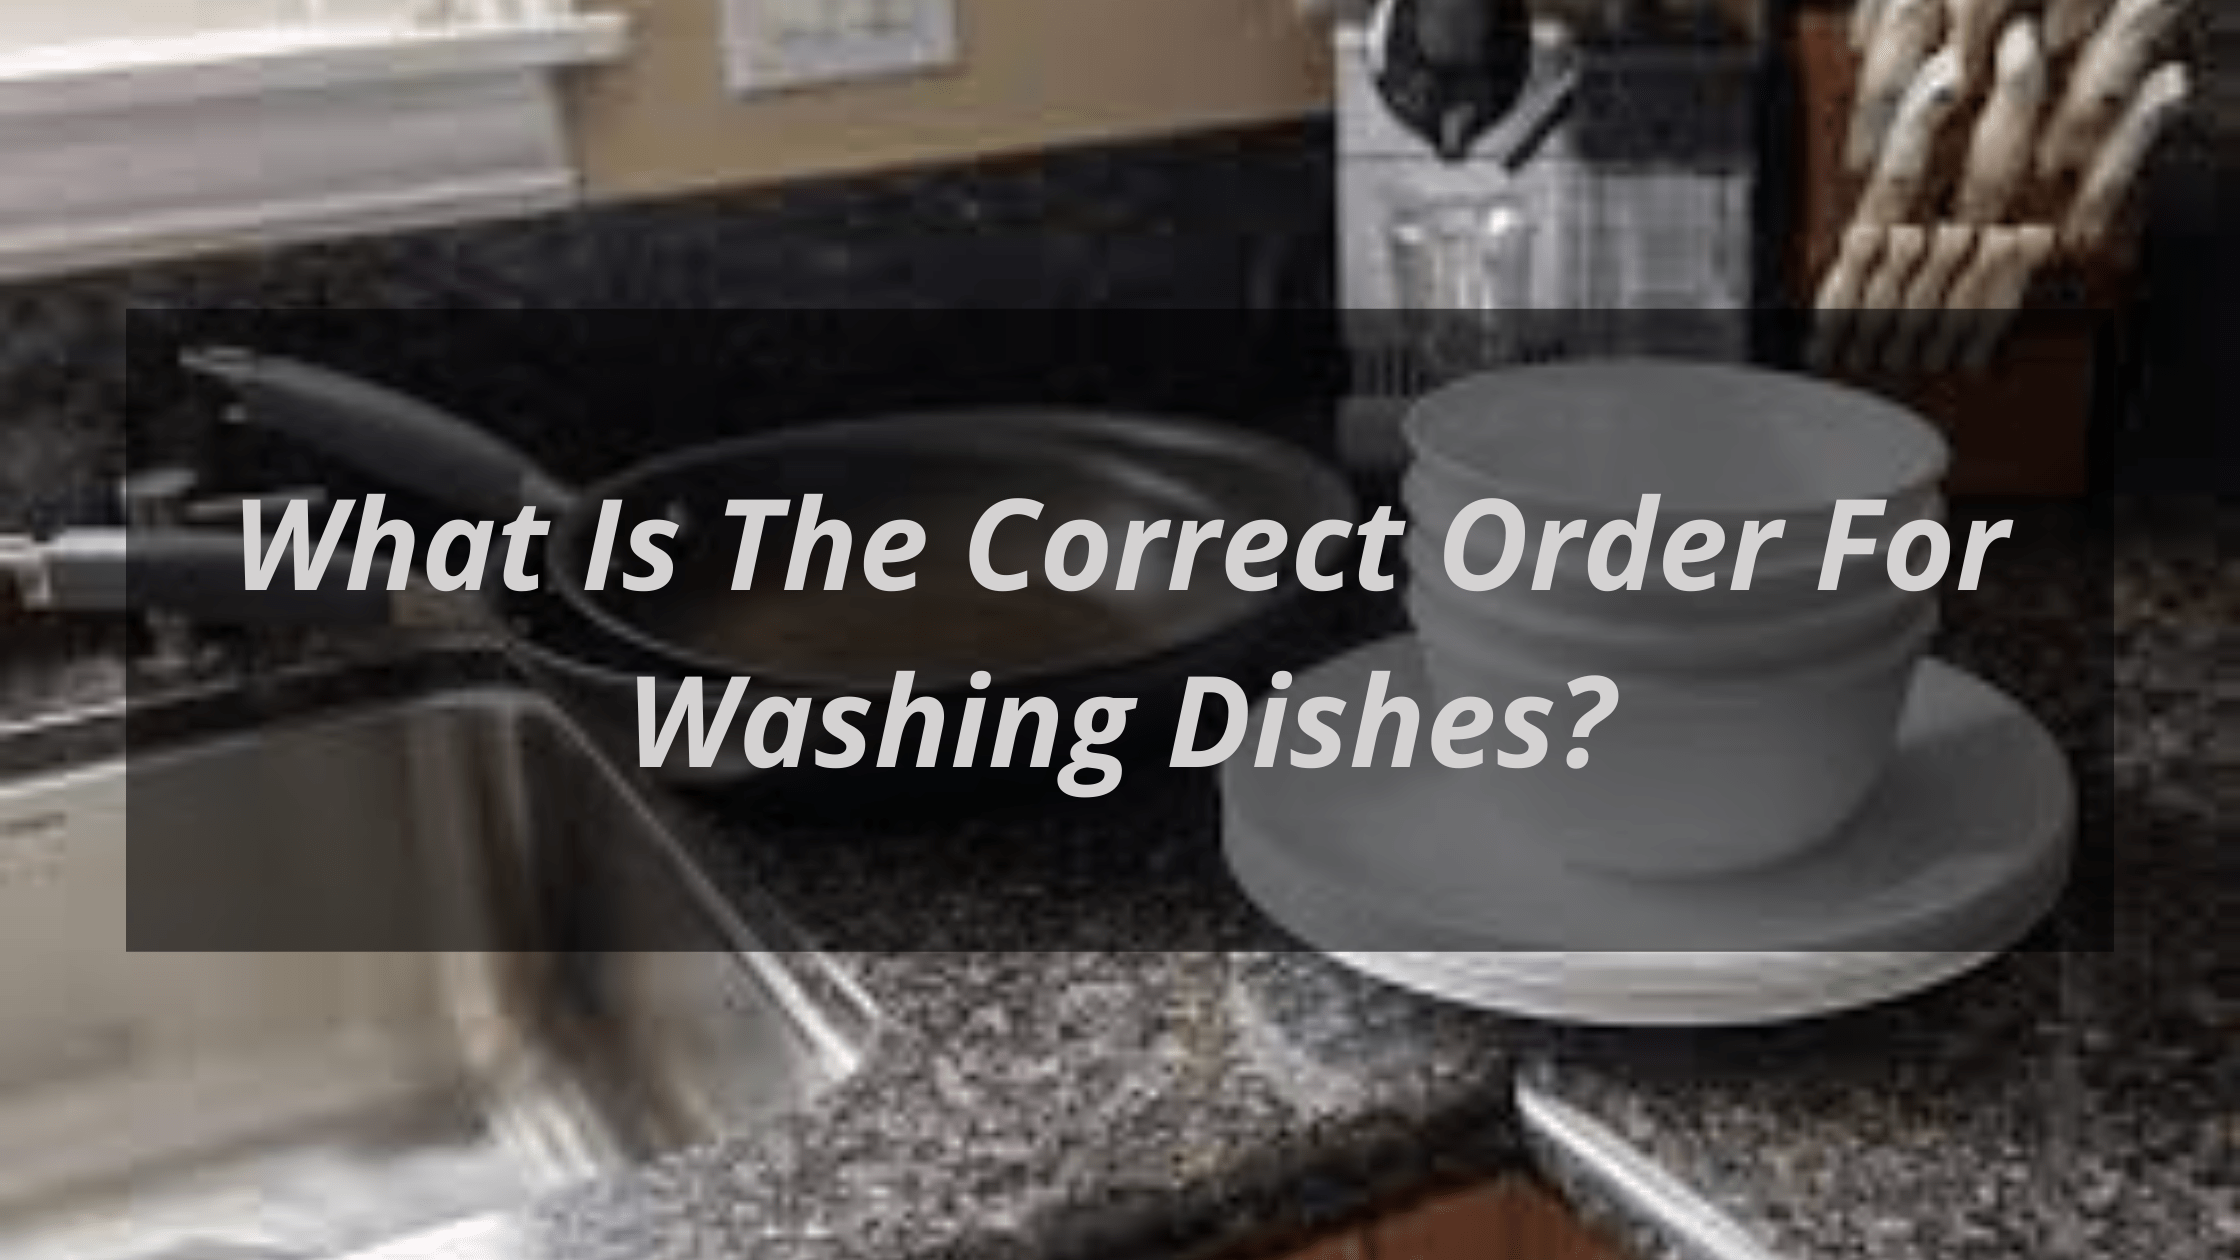 What Is The Correct Order For Washing Dishes?